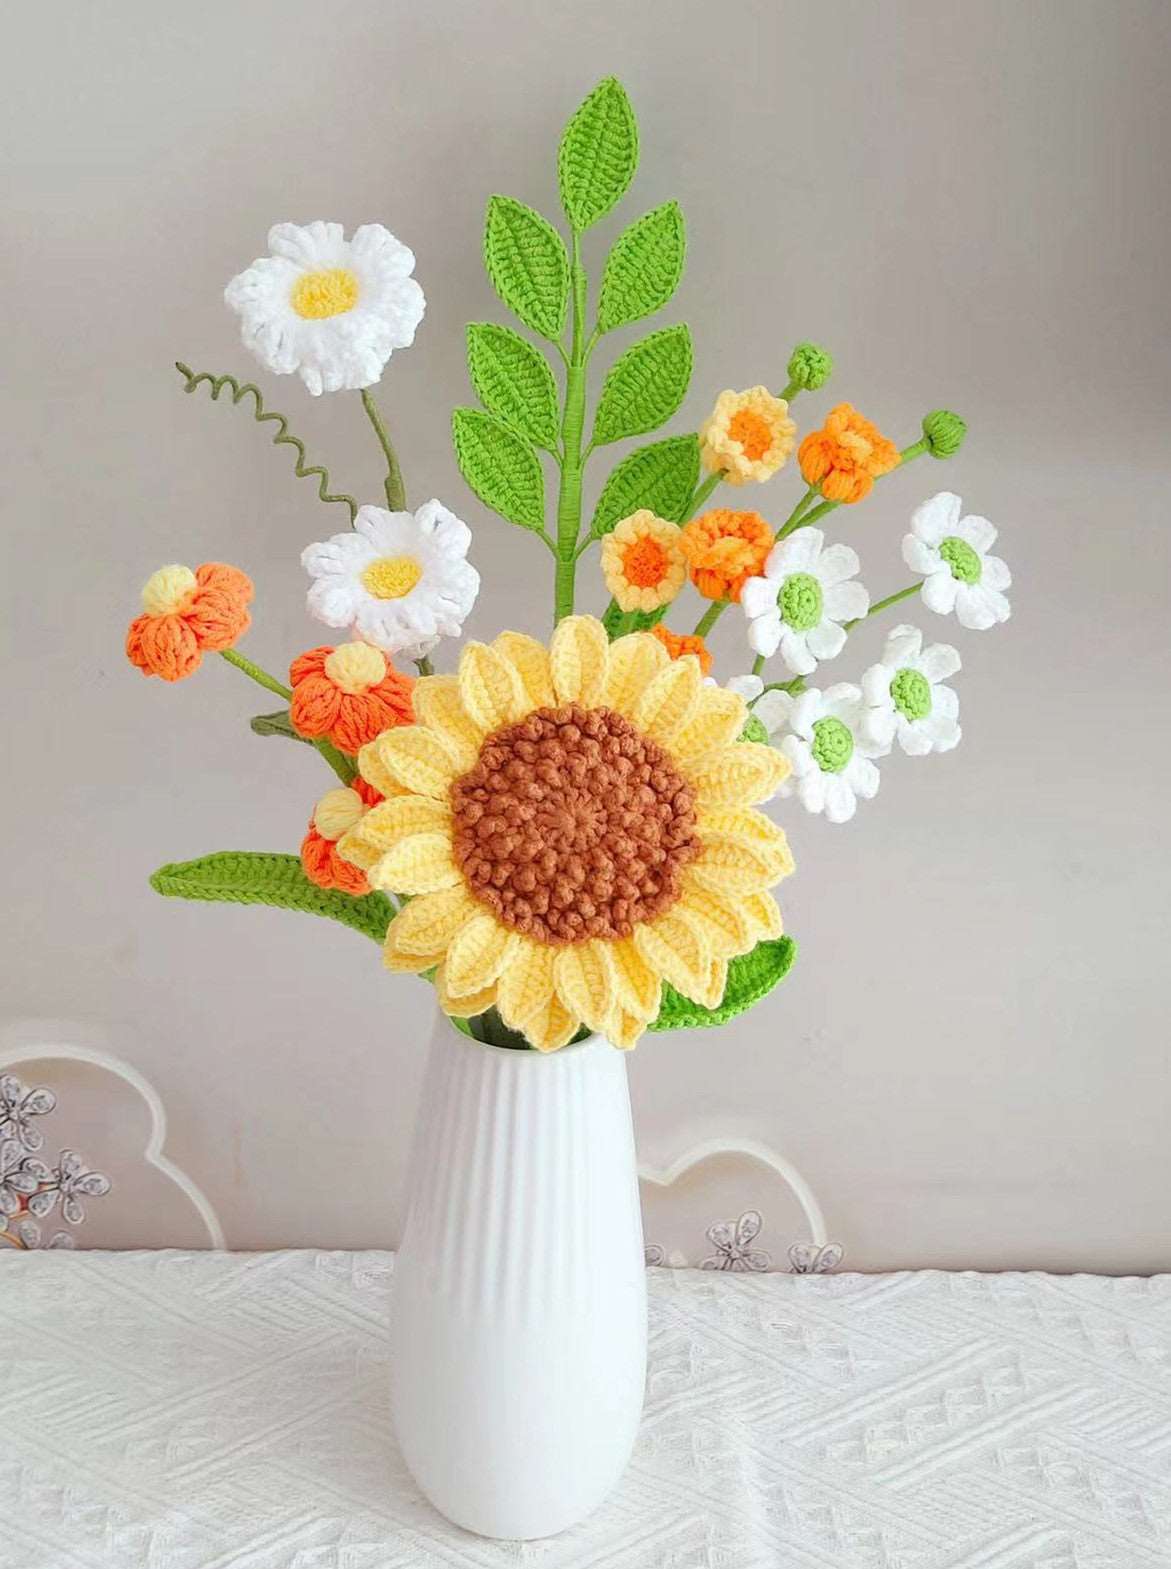 Handmade Sunflower Floral Display with Eco-friendly Materials